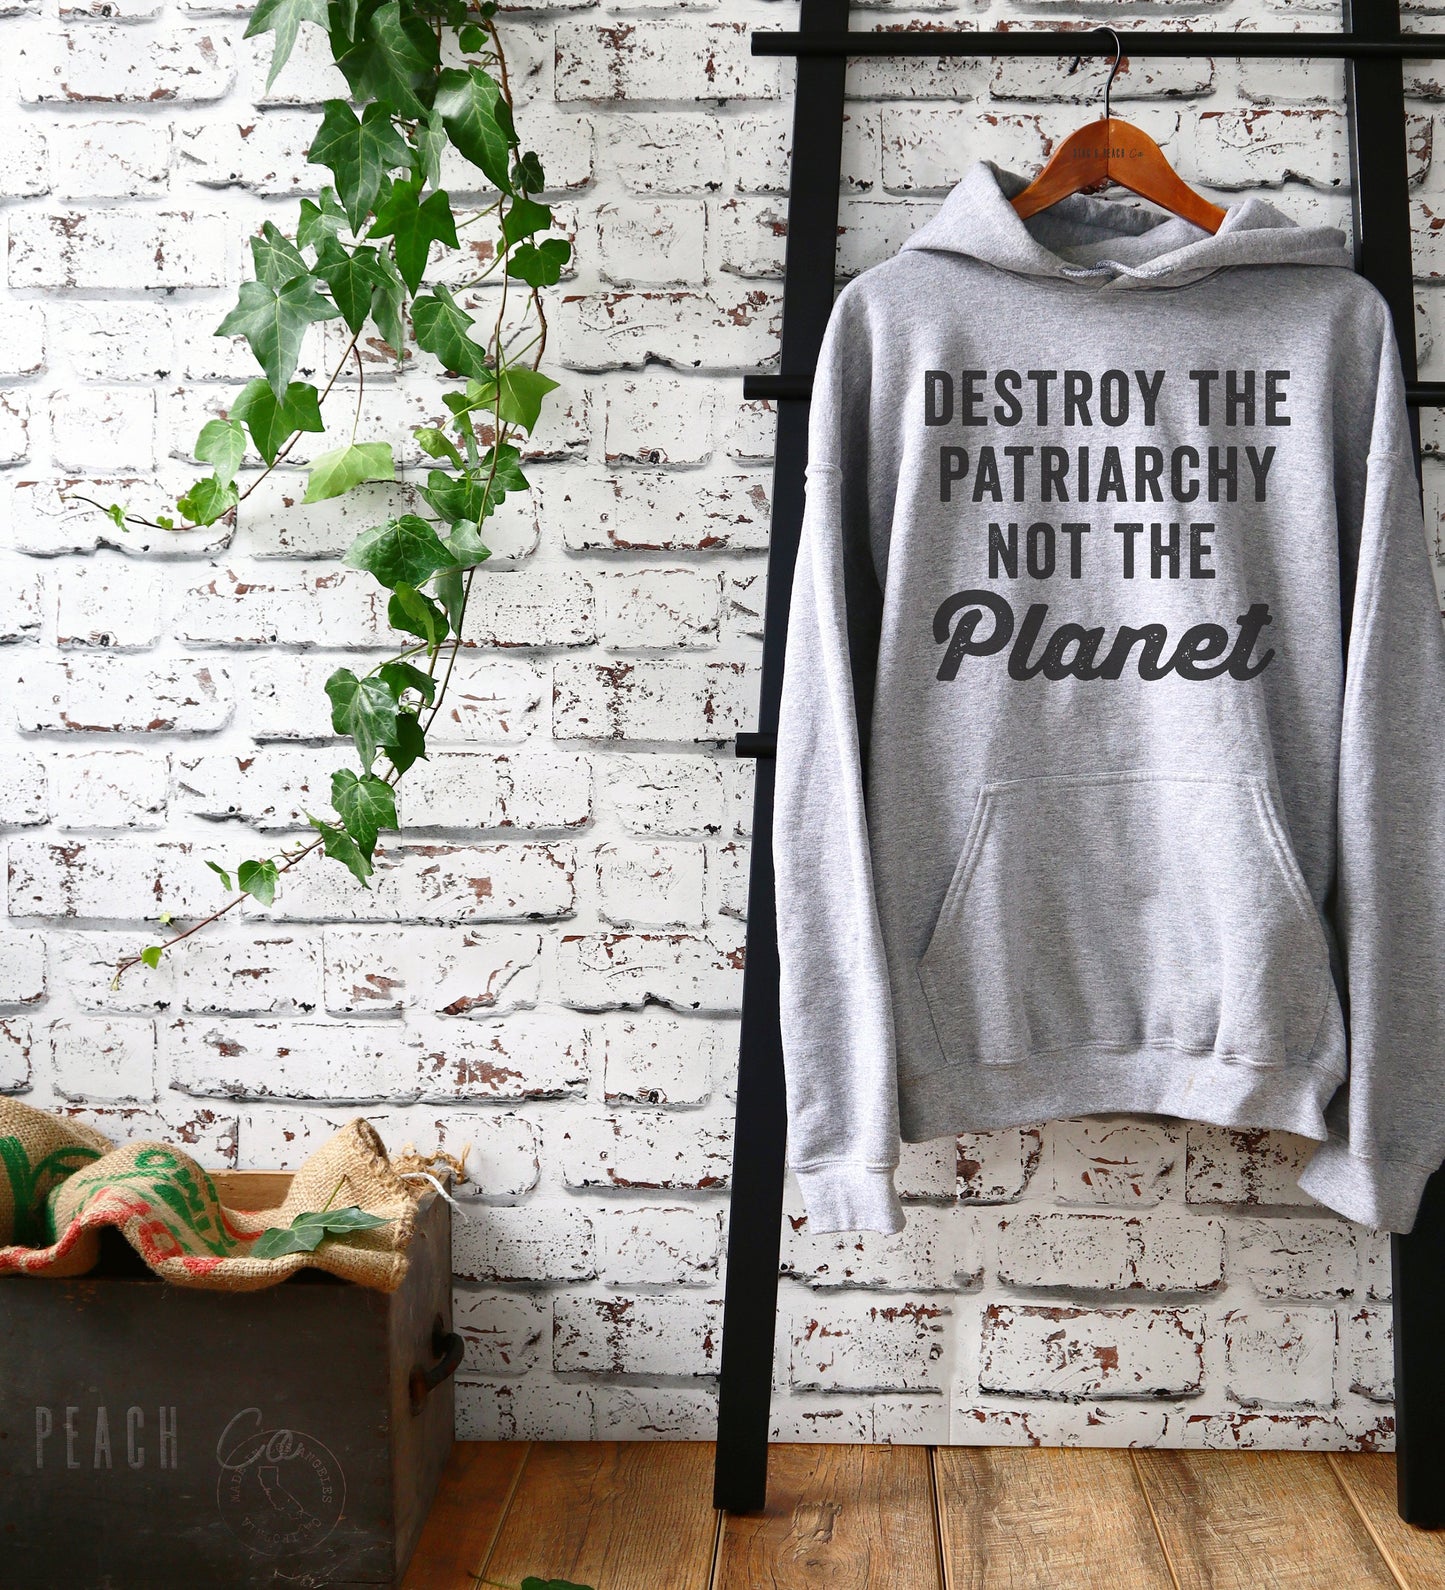 Destroy The Patriarchy Not The Planet Hoodie - Feminist hoodie, Feminist shirt, Feminist gifts, Pro feminism, Girl power shirt